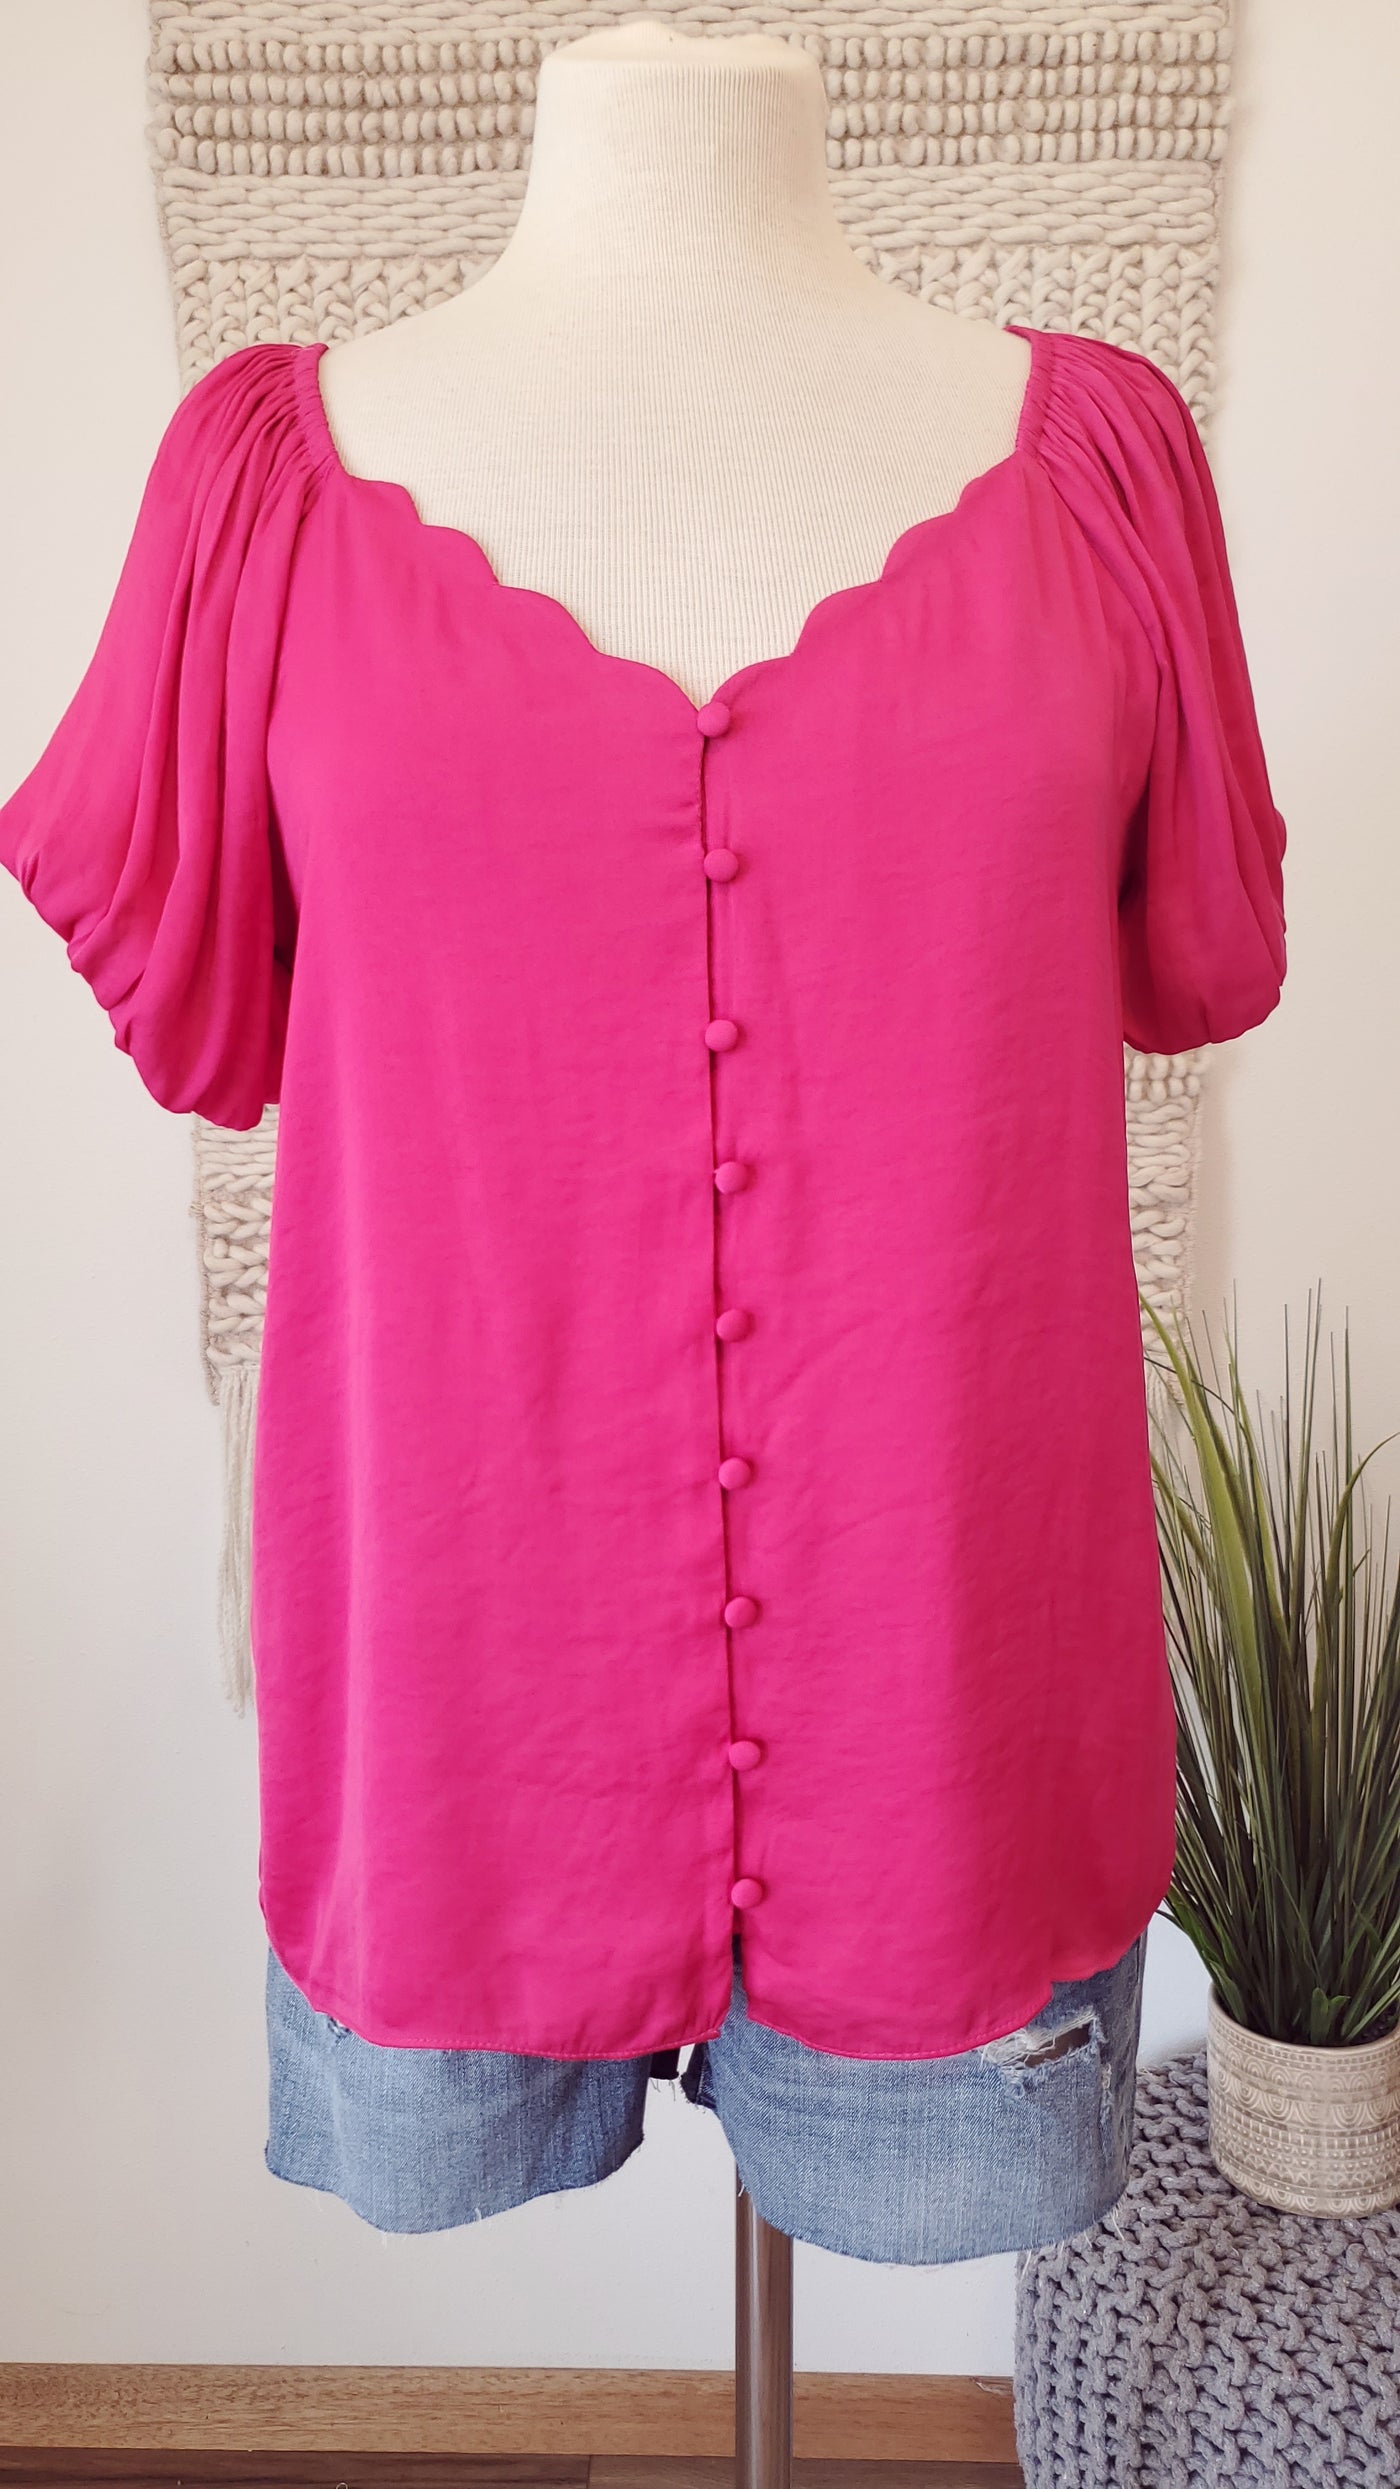 PRISCILLA scalloped top in pink sorbet-CLEARANCE